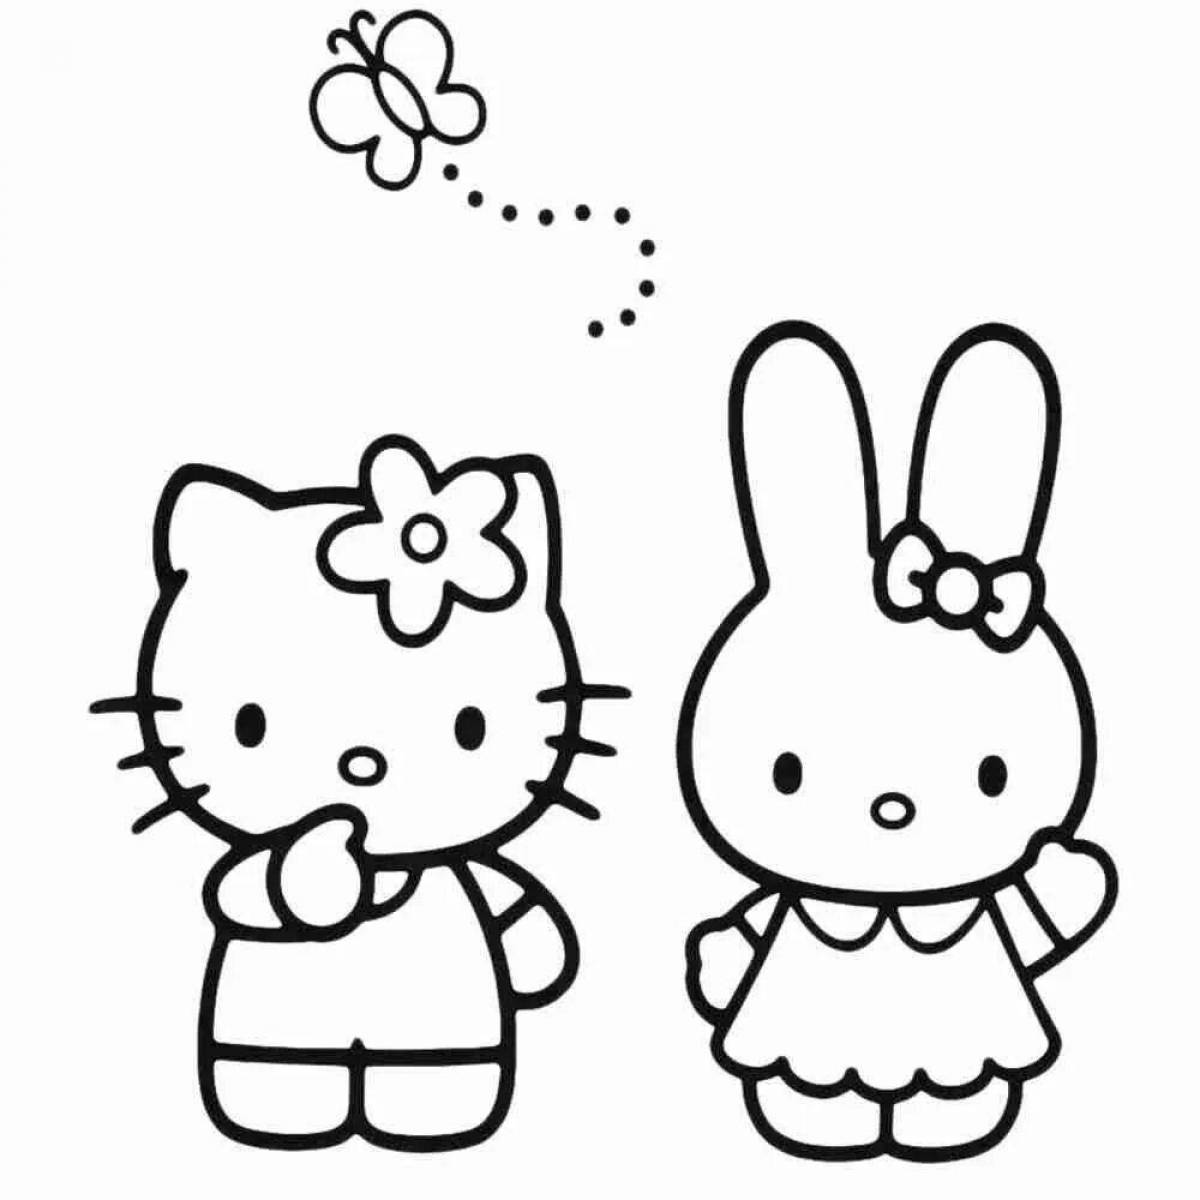 Playtime aster kitty coloring page